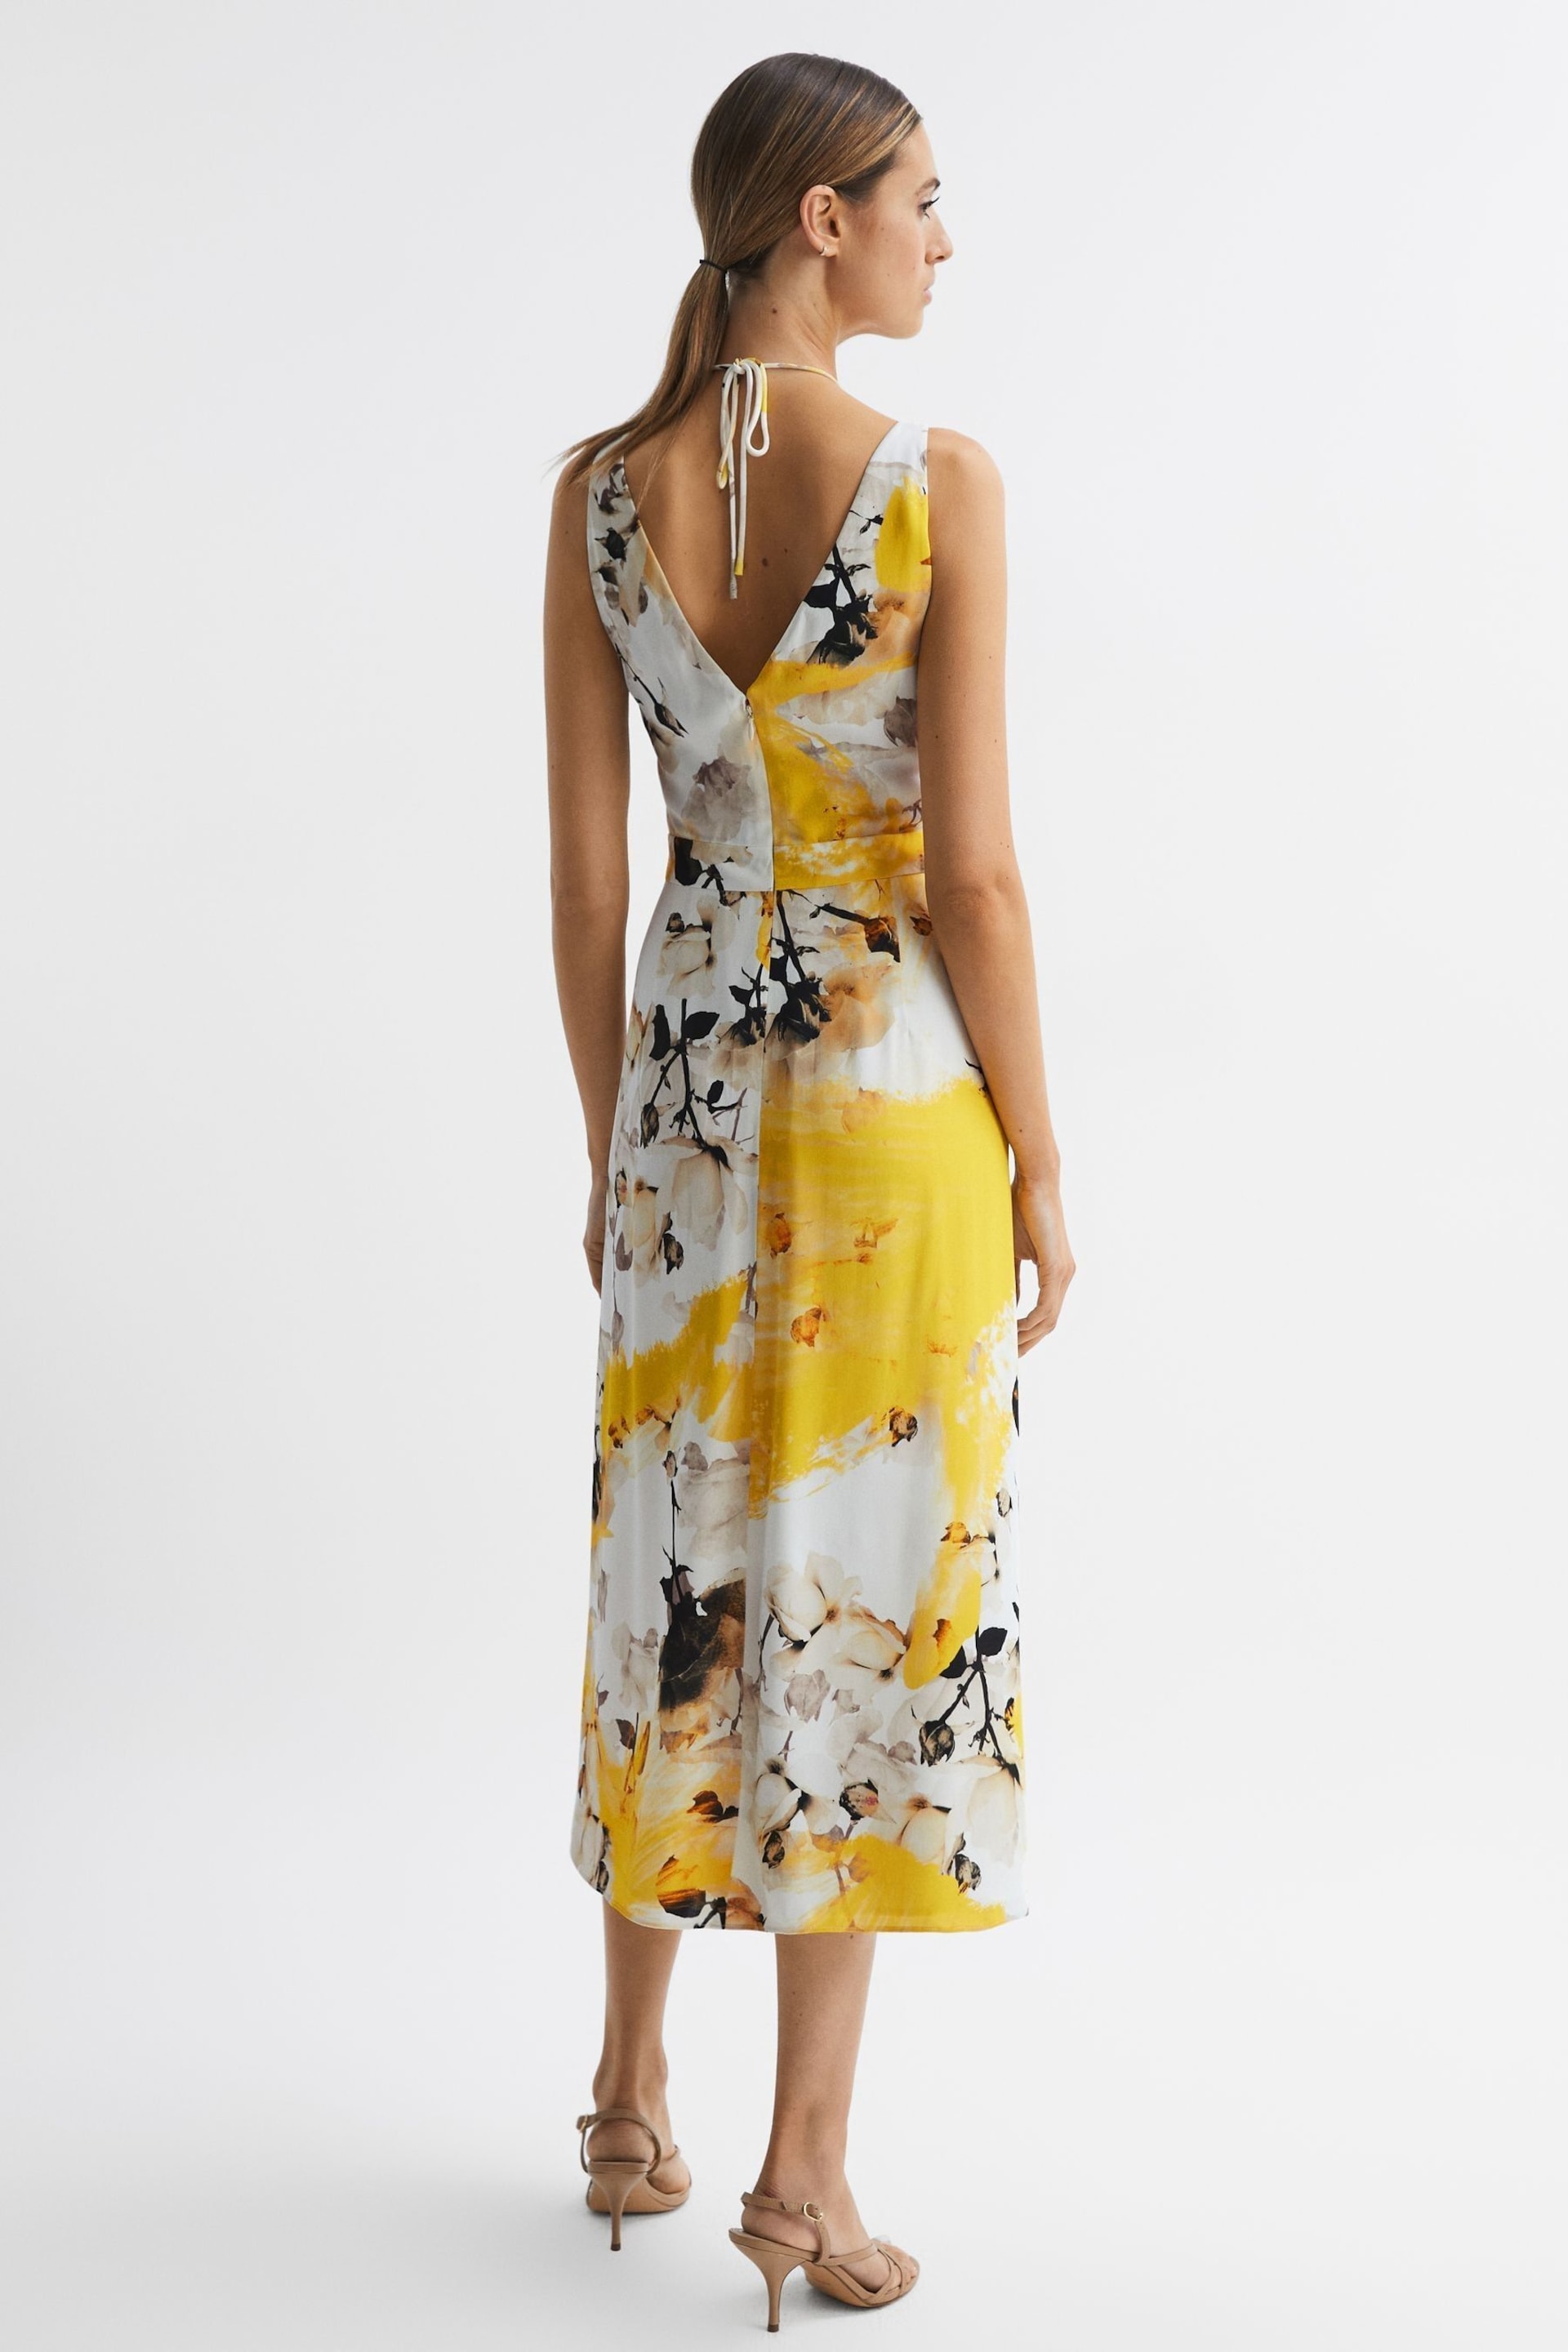 Reiss Yellow Kasia Fitted Floral Print Midi Dress - Image 5 of 6